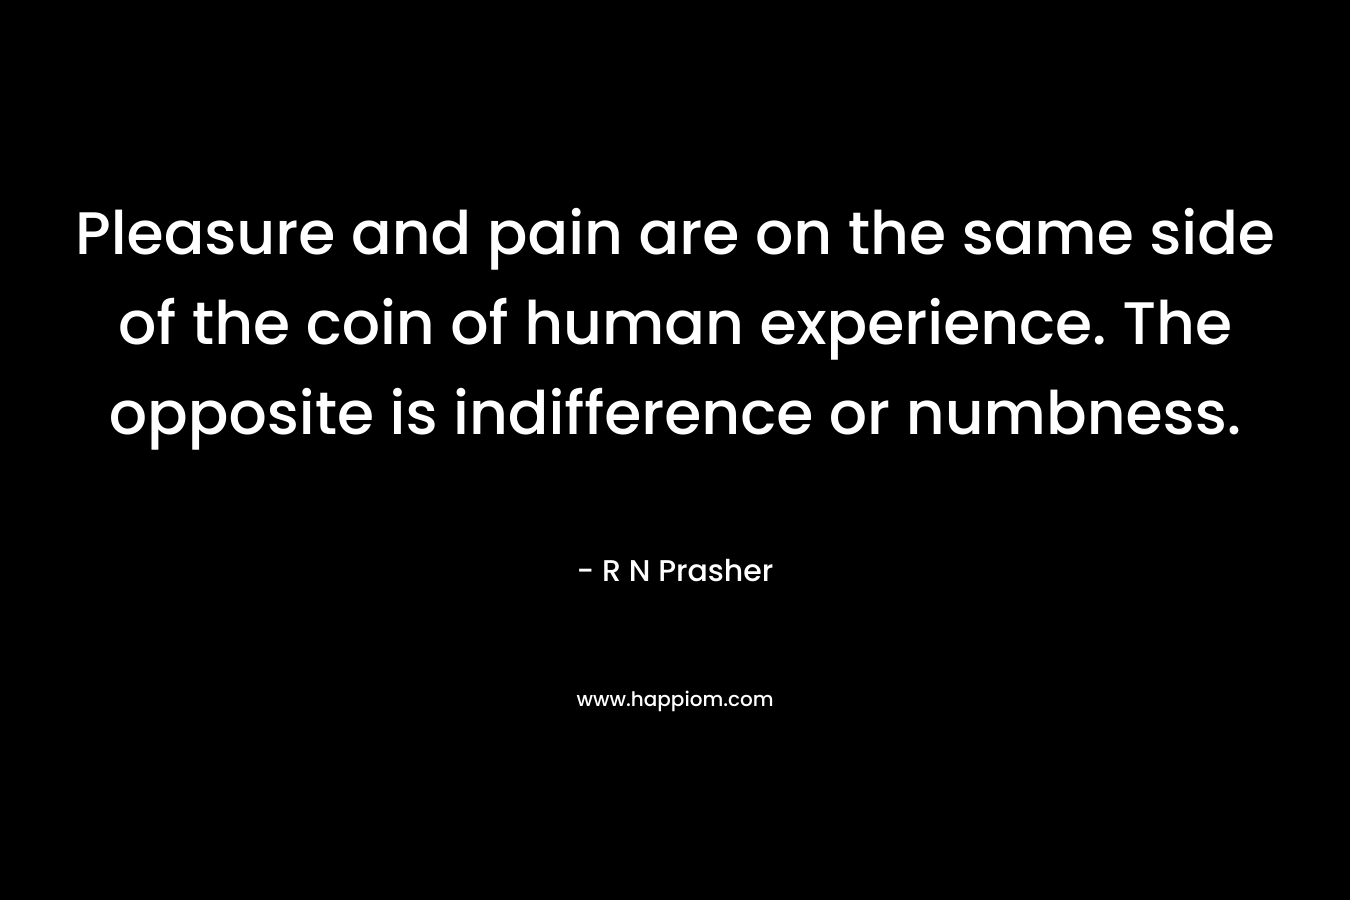 Pleasure and pain are on the same side of the coin of human experience. The opposite is indifference or numbness. – R N Prasher